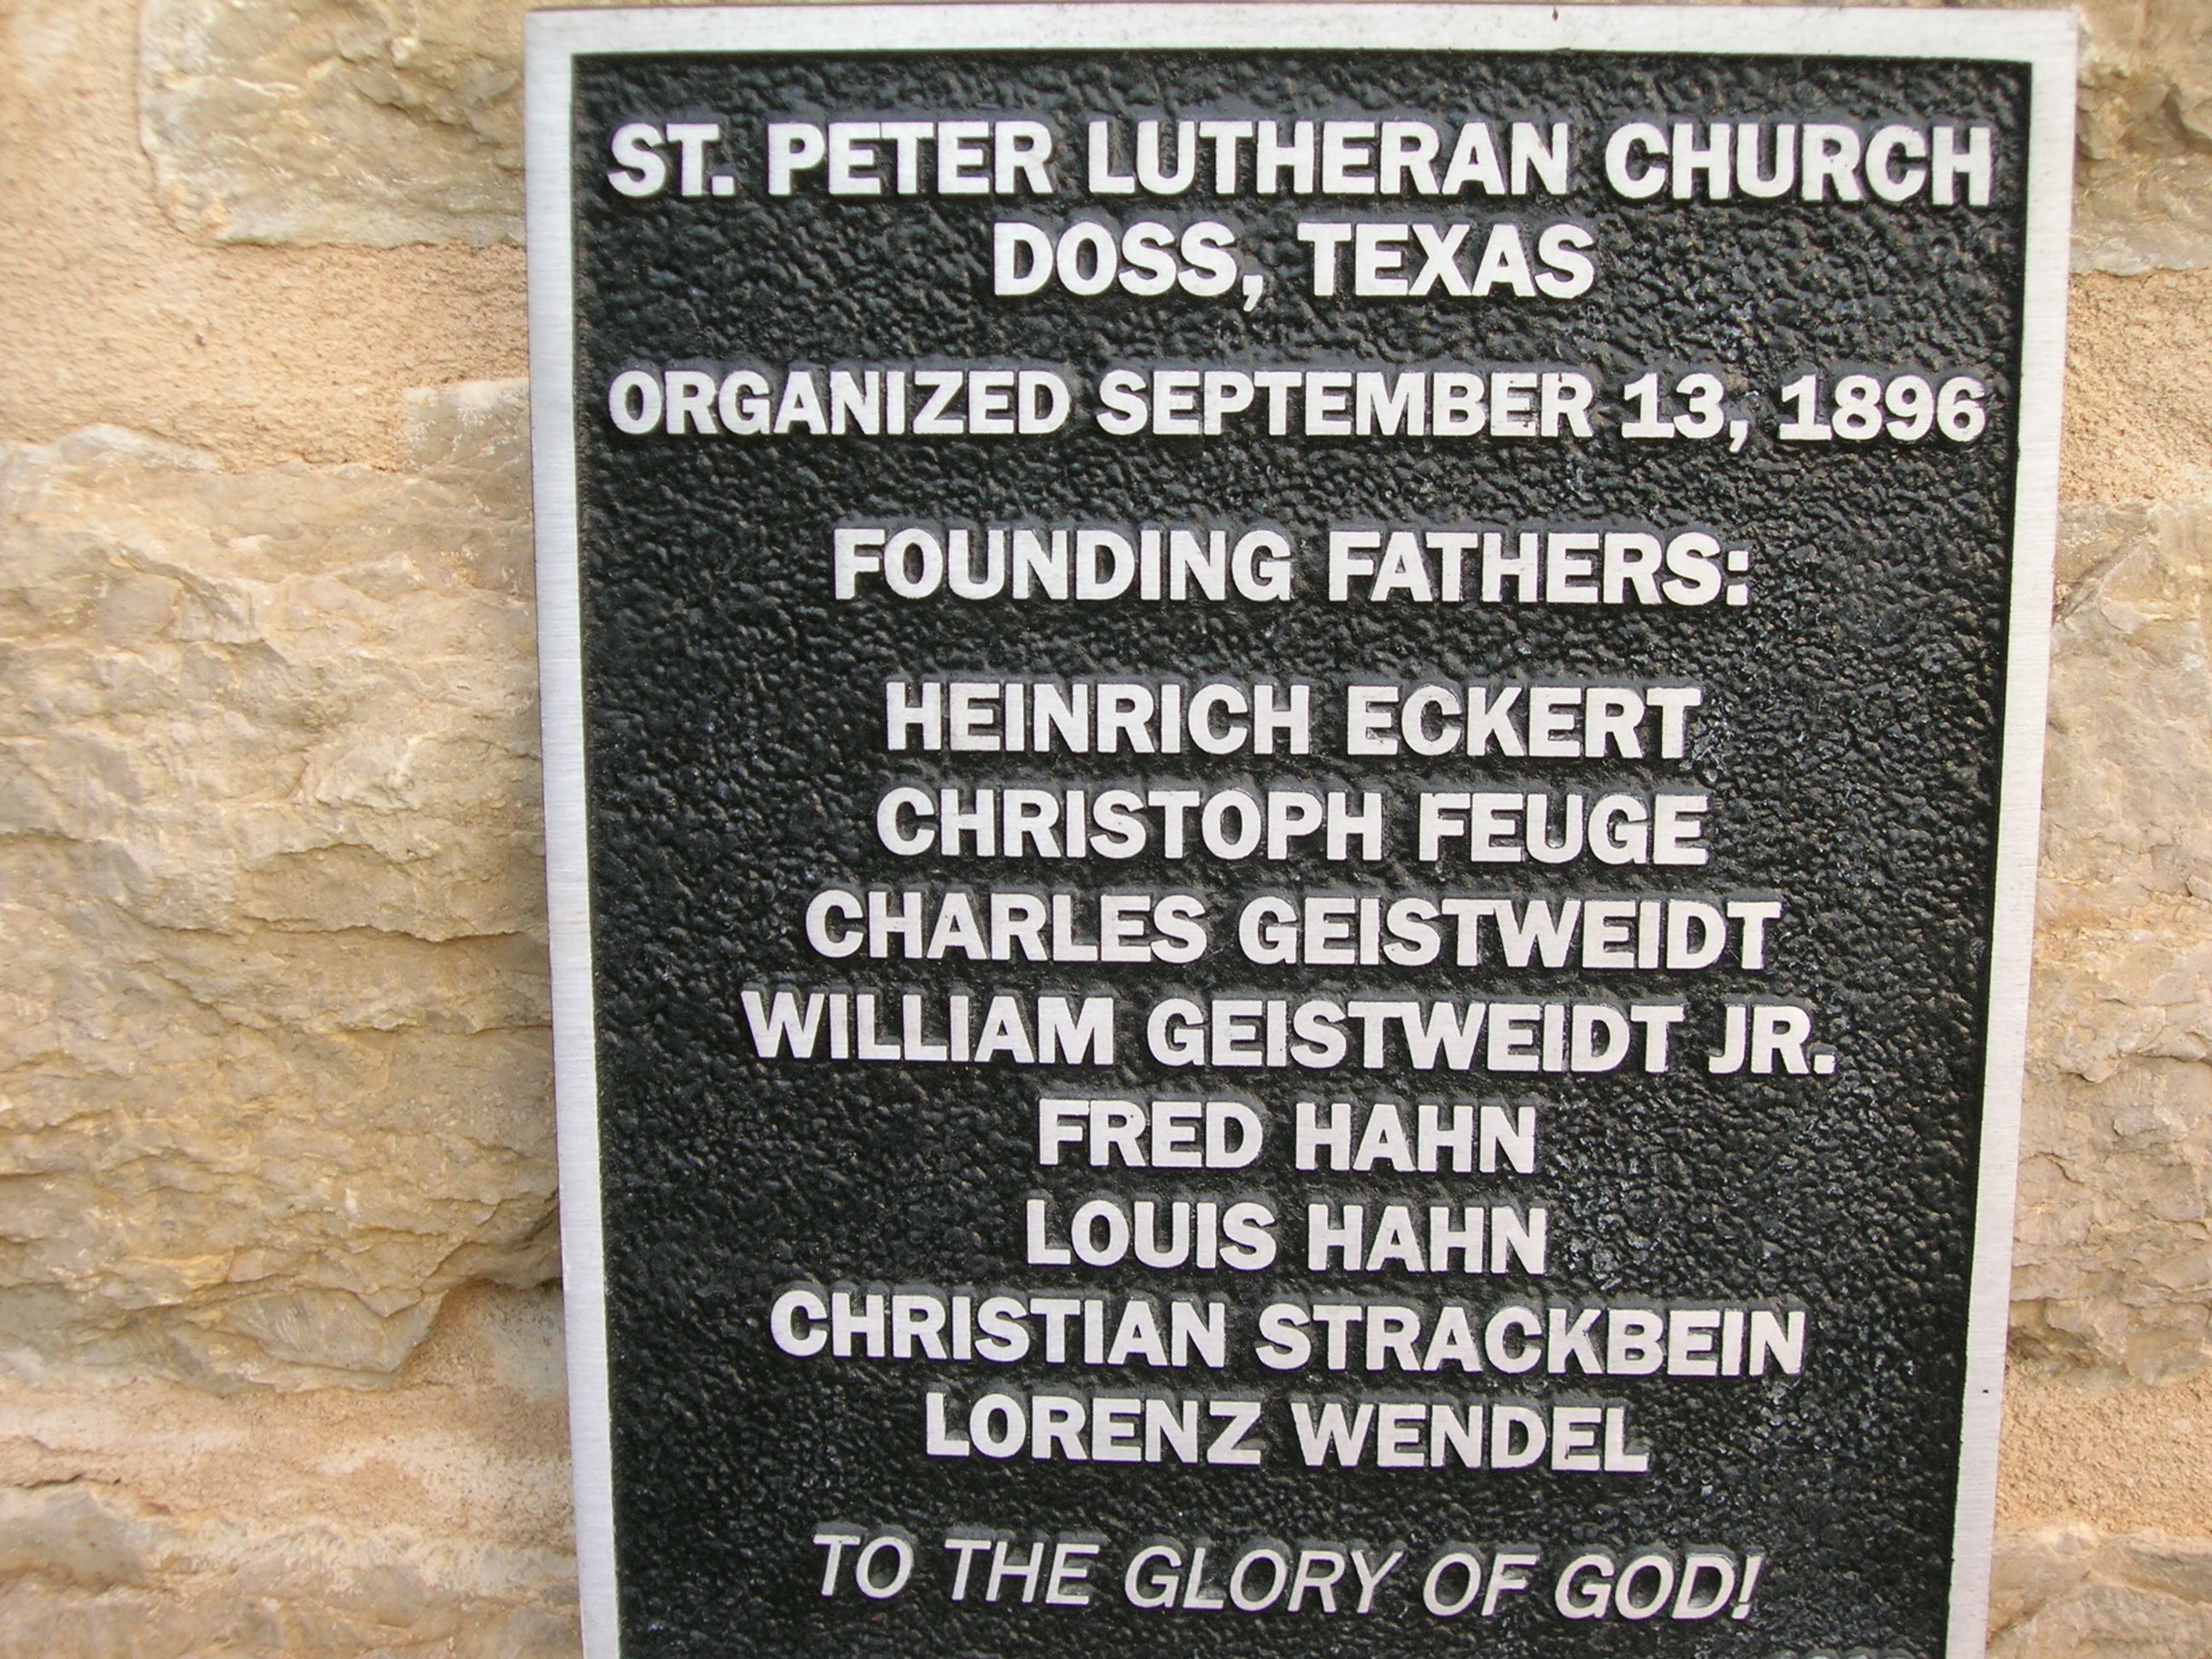 St. Peter Lutheran Church Founding Fathers